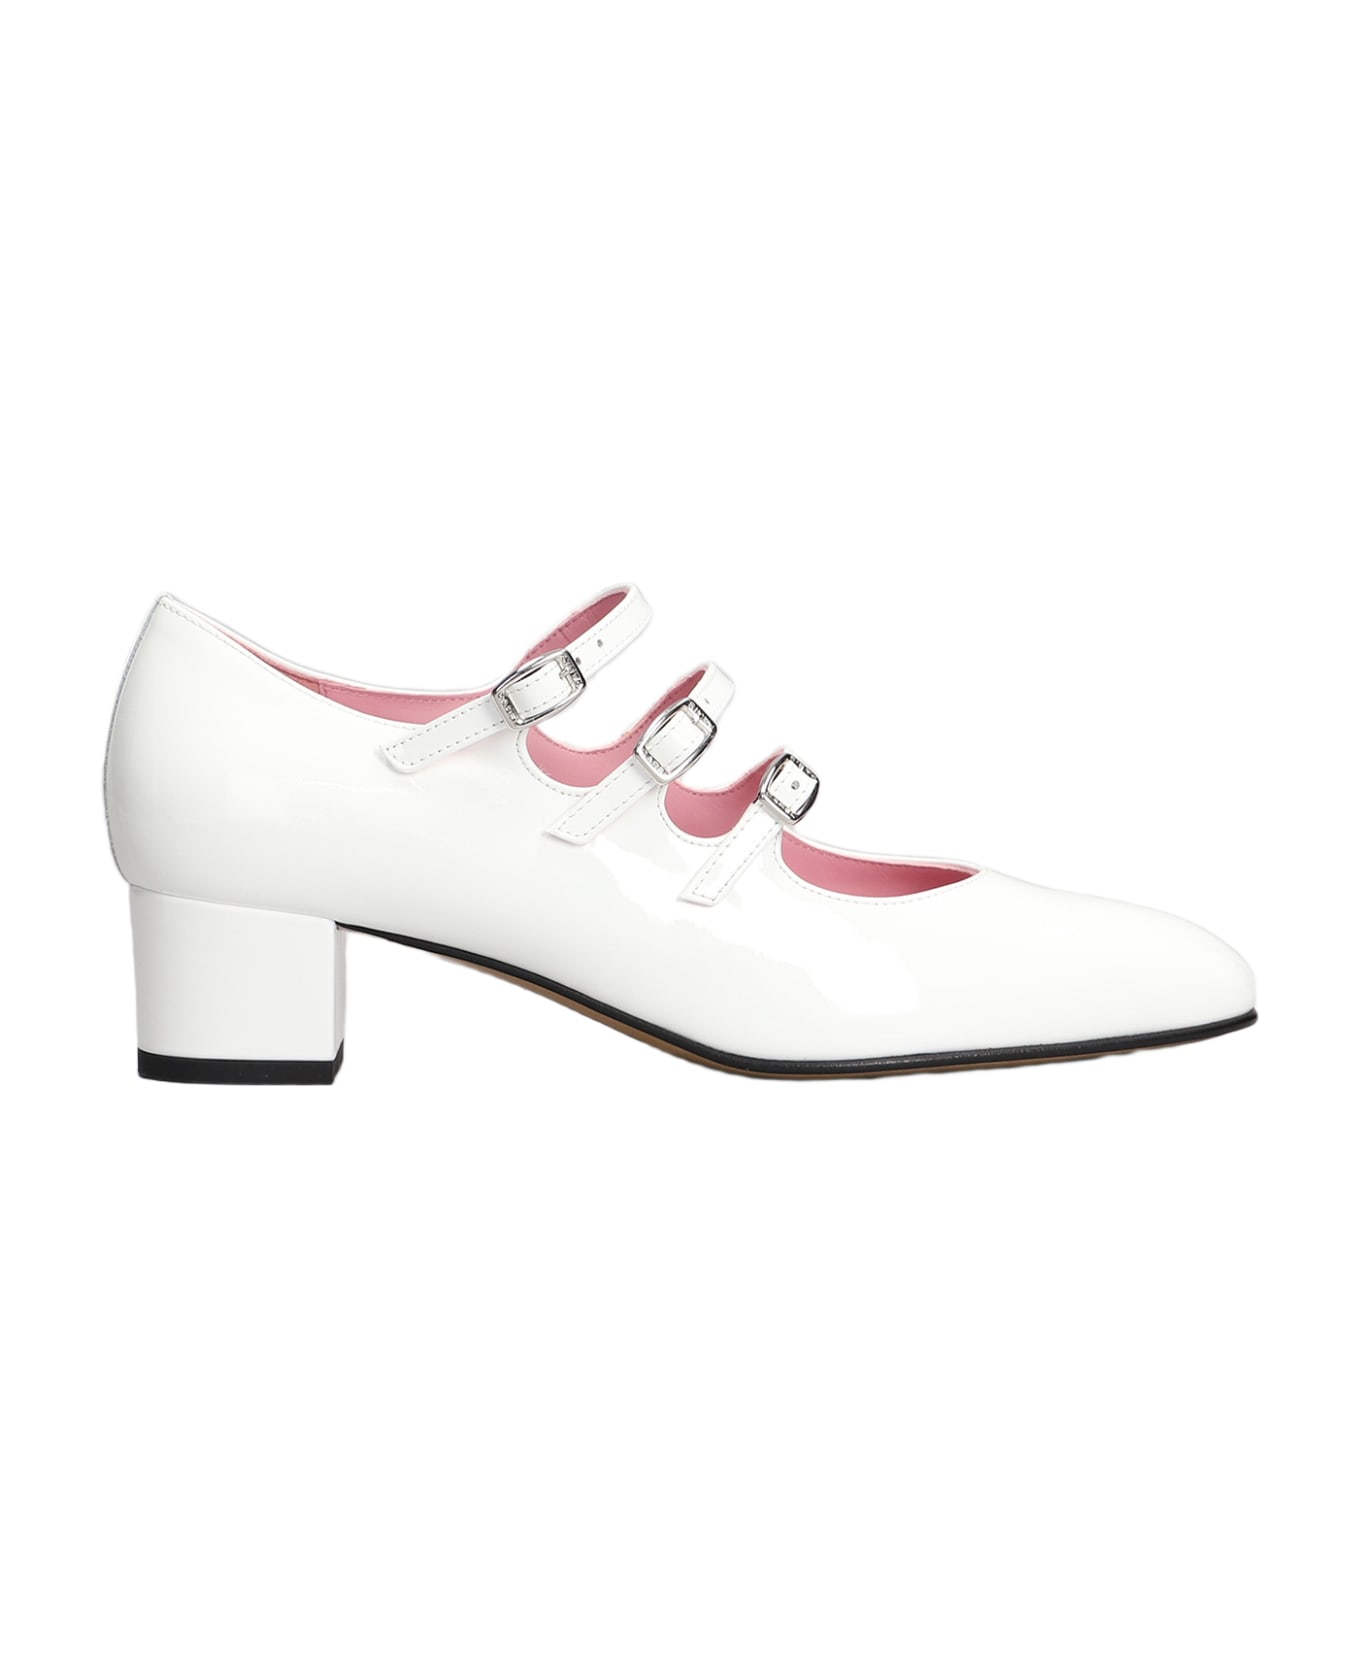 Carel Kina Pumps In White Patent Leather - white